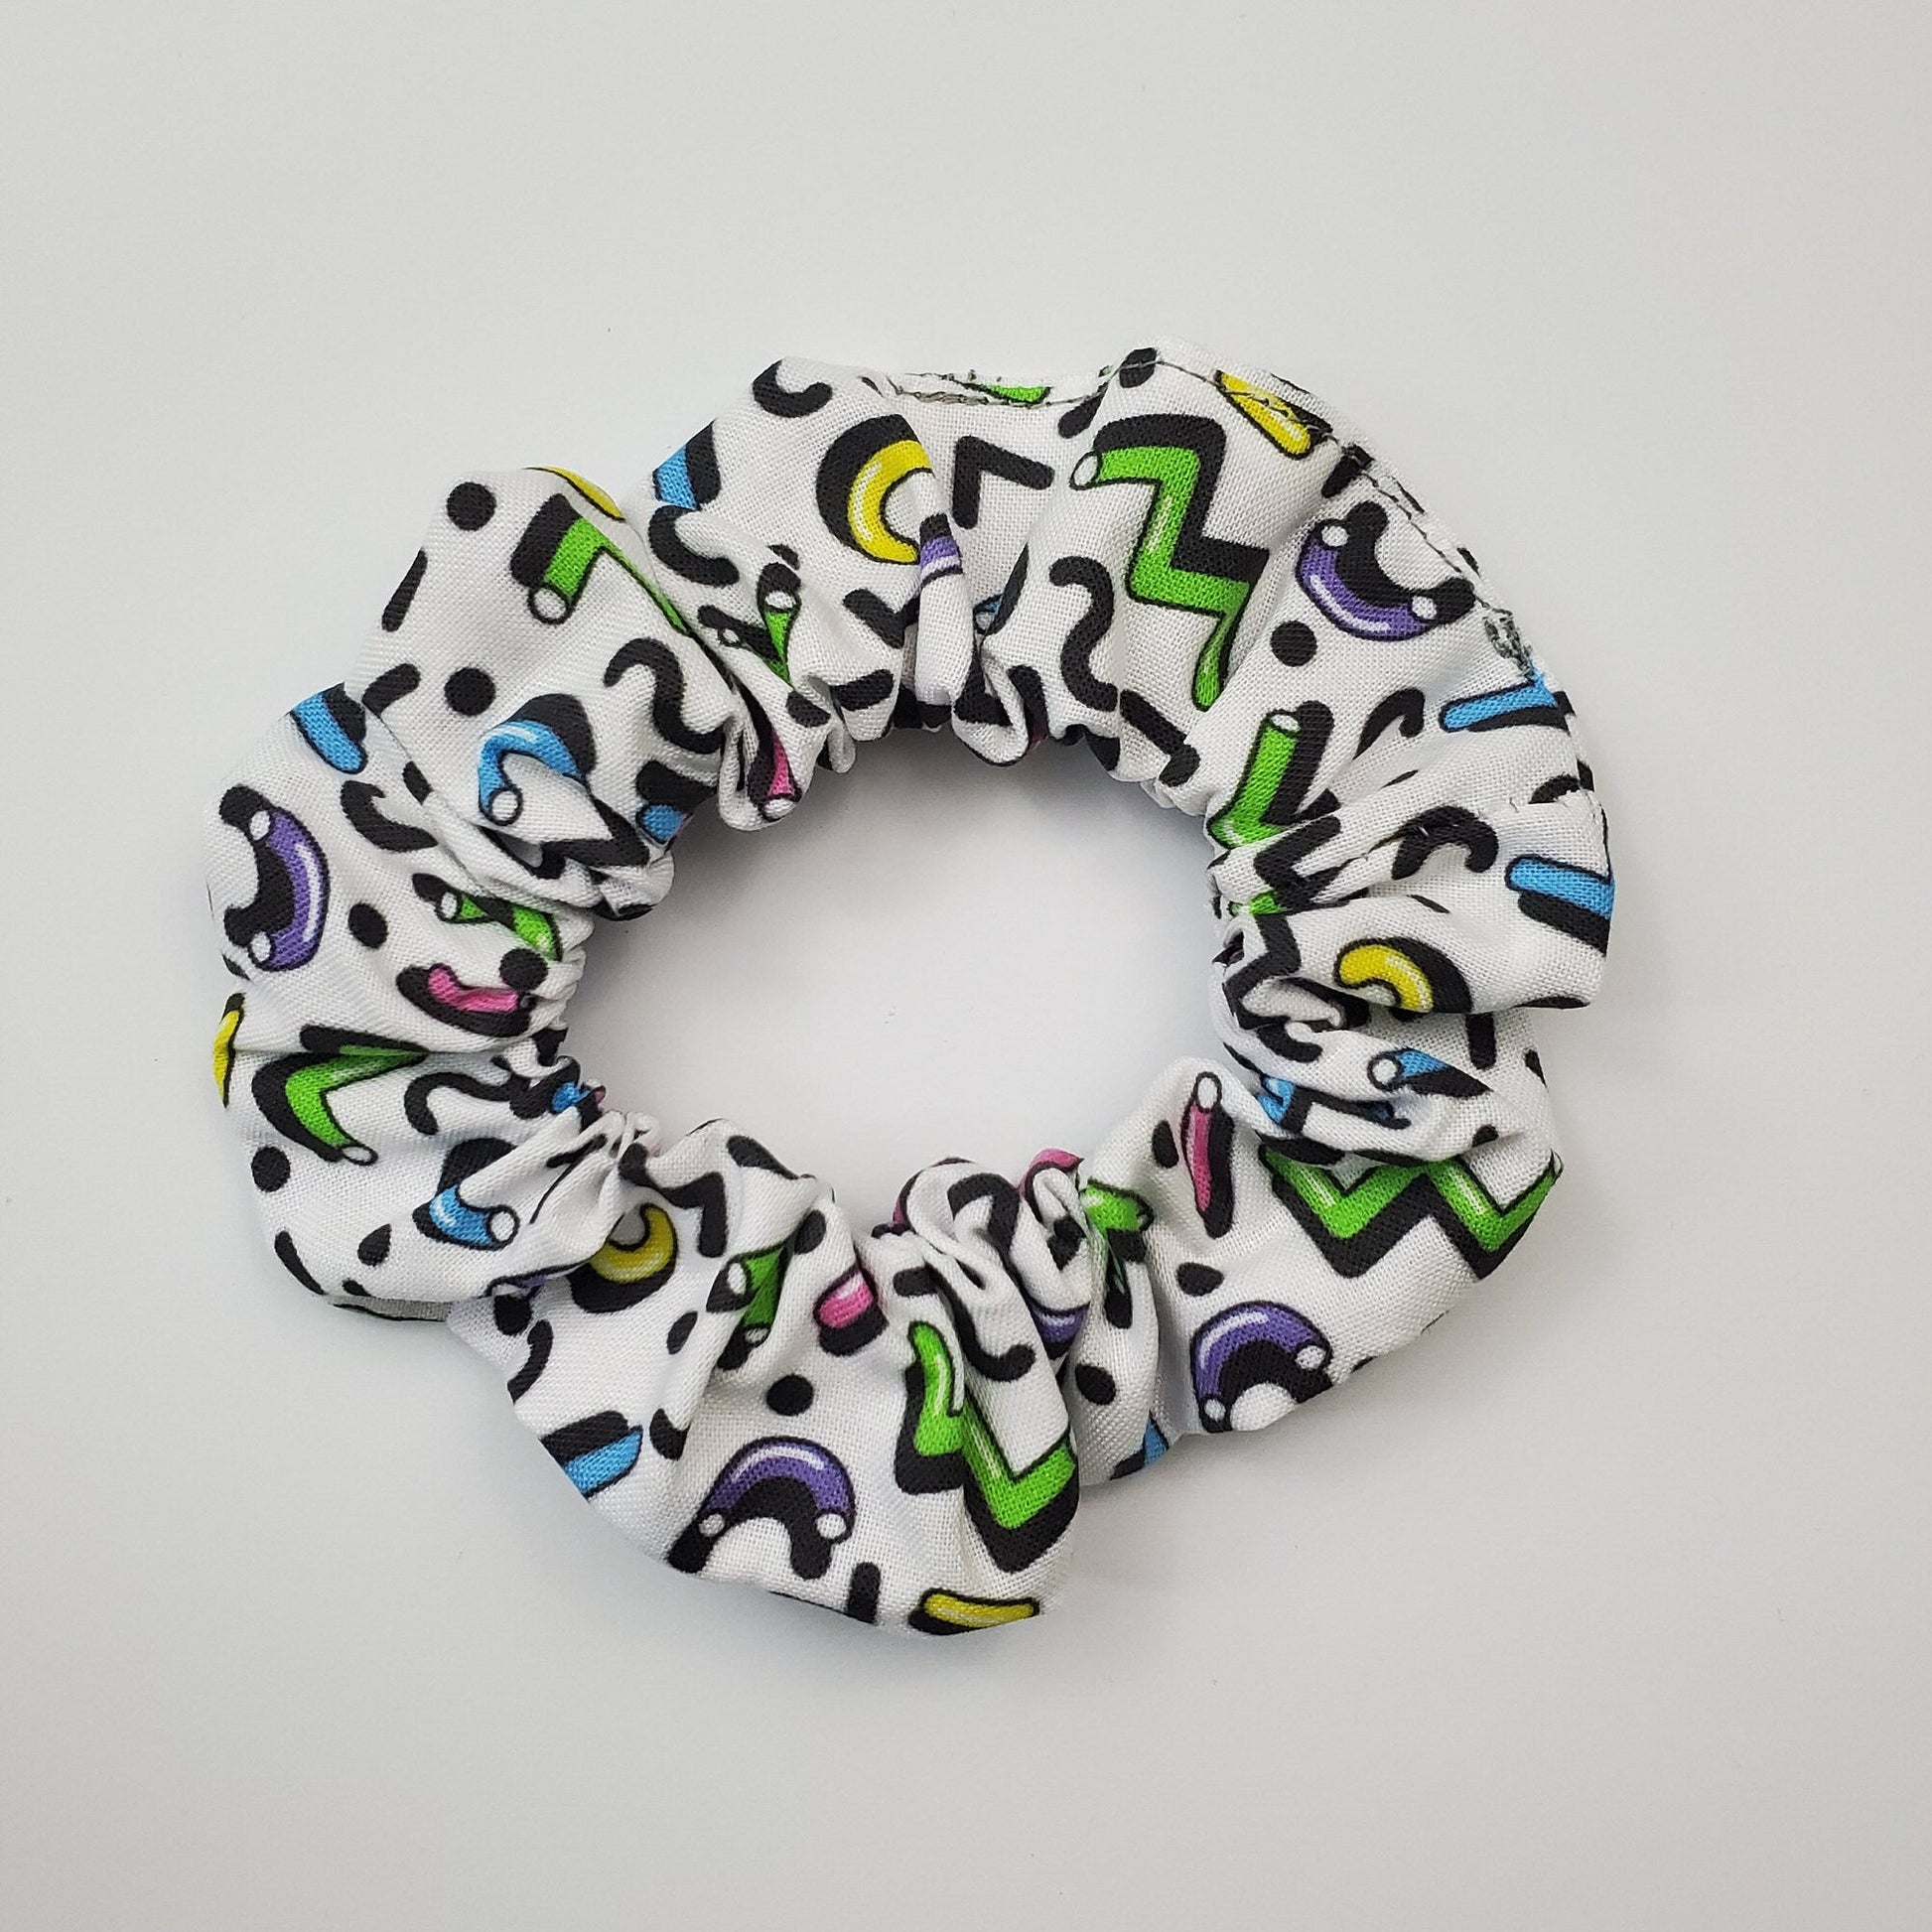 White scrunchie with brightly colored squiggle design - 90s inspired. Some purple, some green, yellow, hot pink, and black squiggles in macaroni shapes, zig zags, etc.